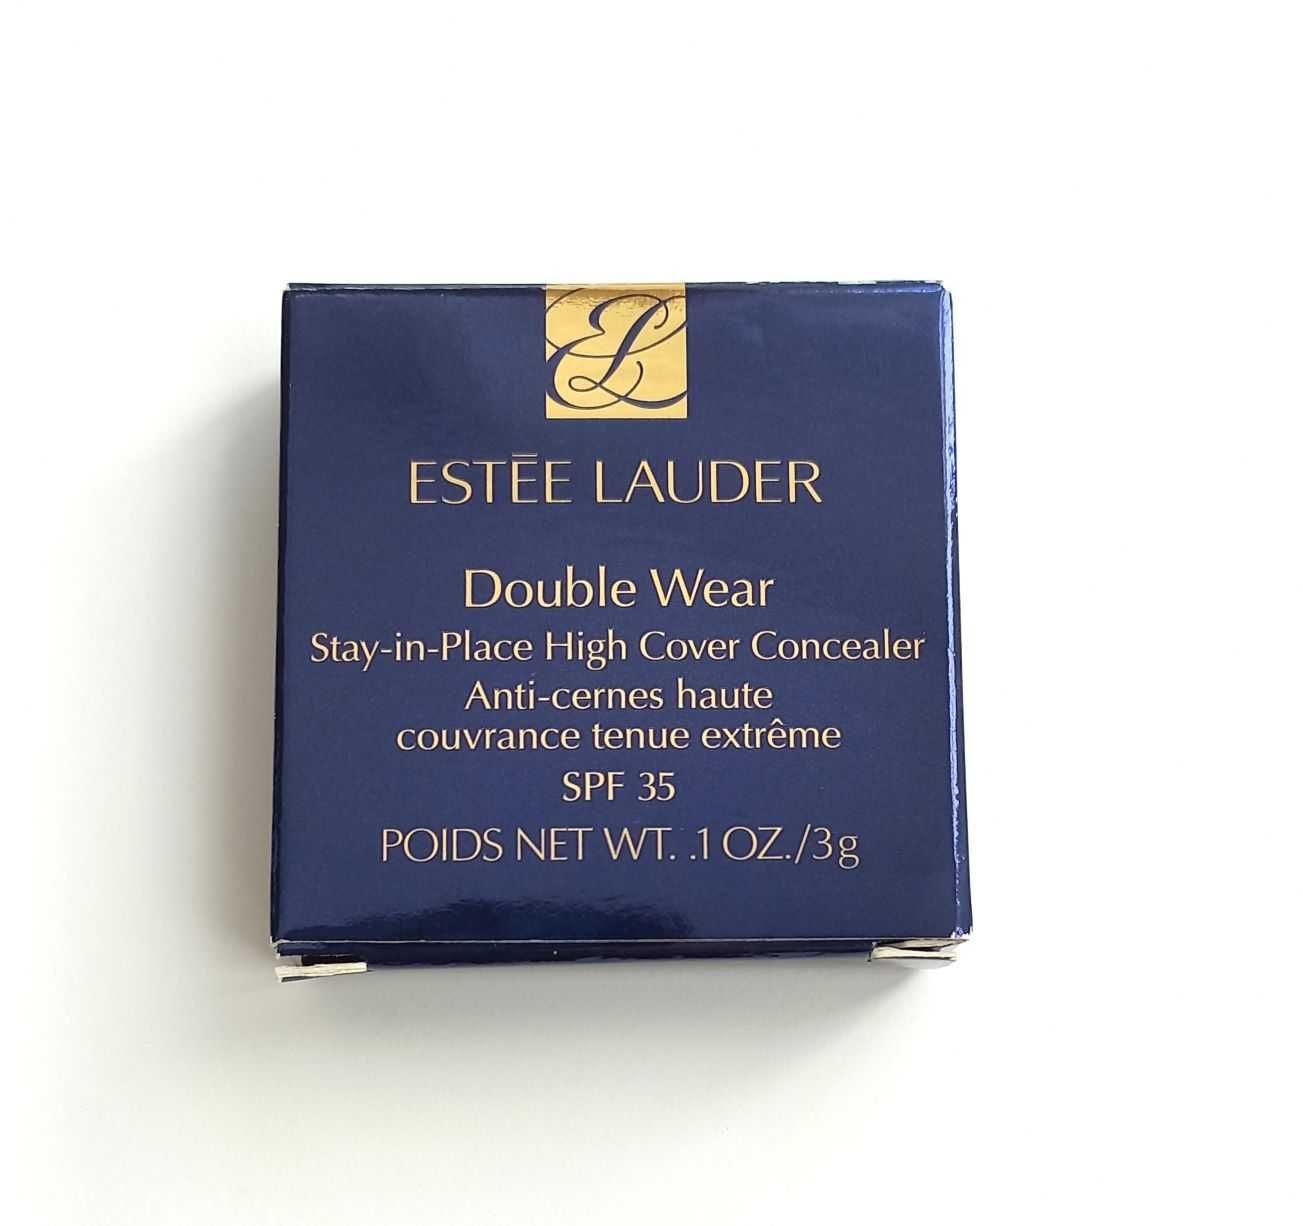 ESTEE LAUDER Korektor Double Wear Stay-in-Place High Cover Concealer